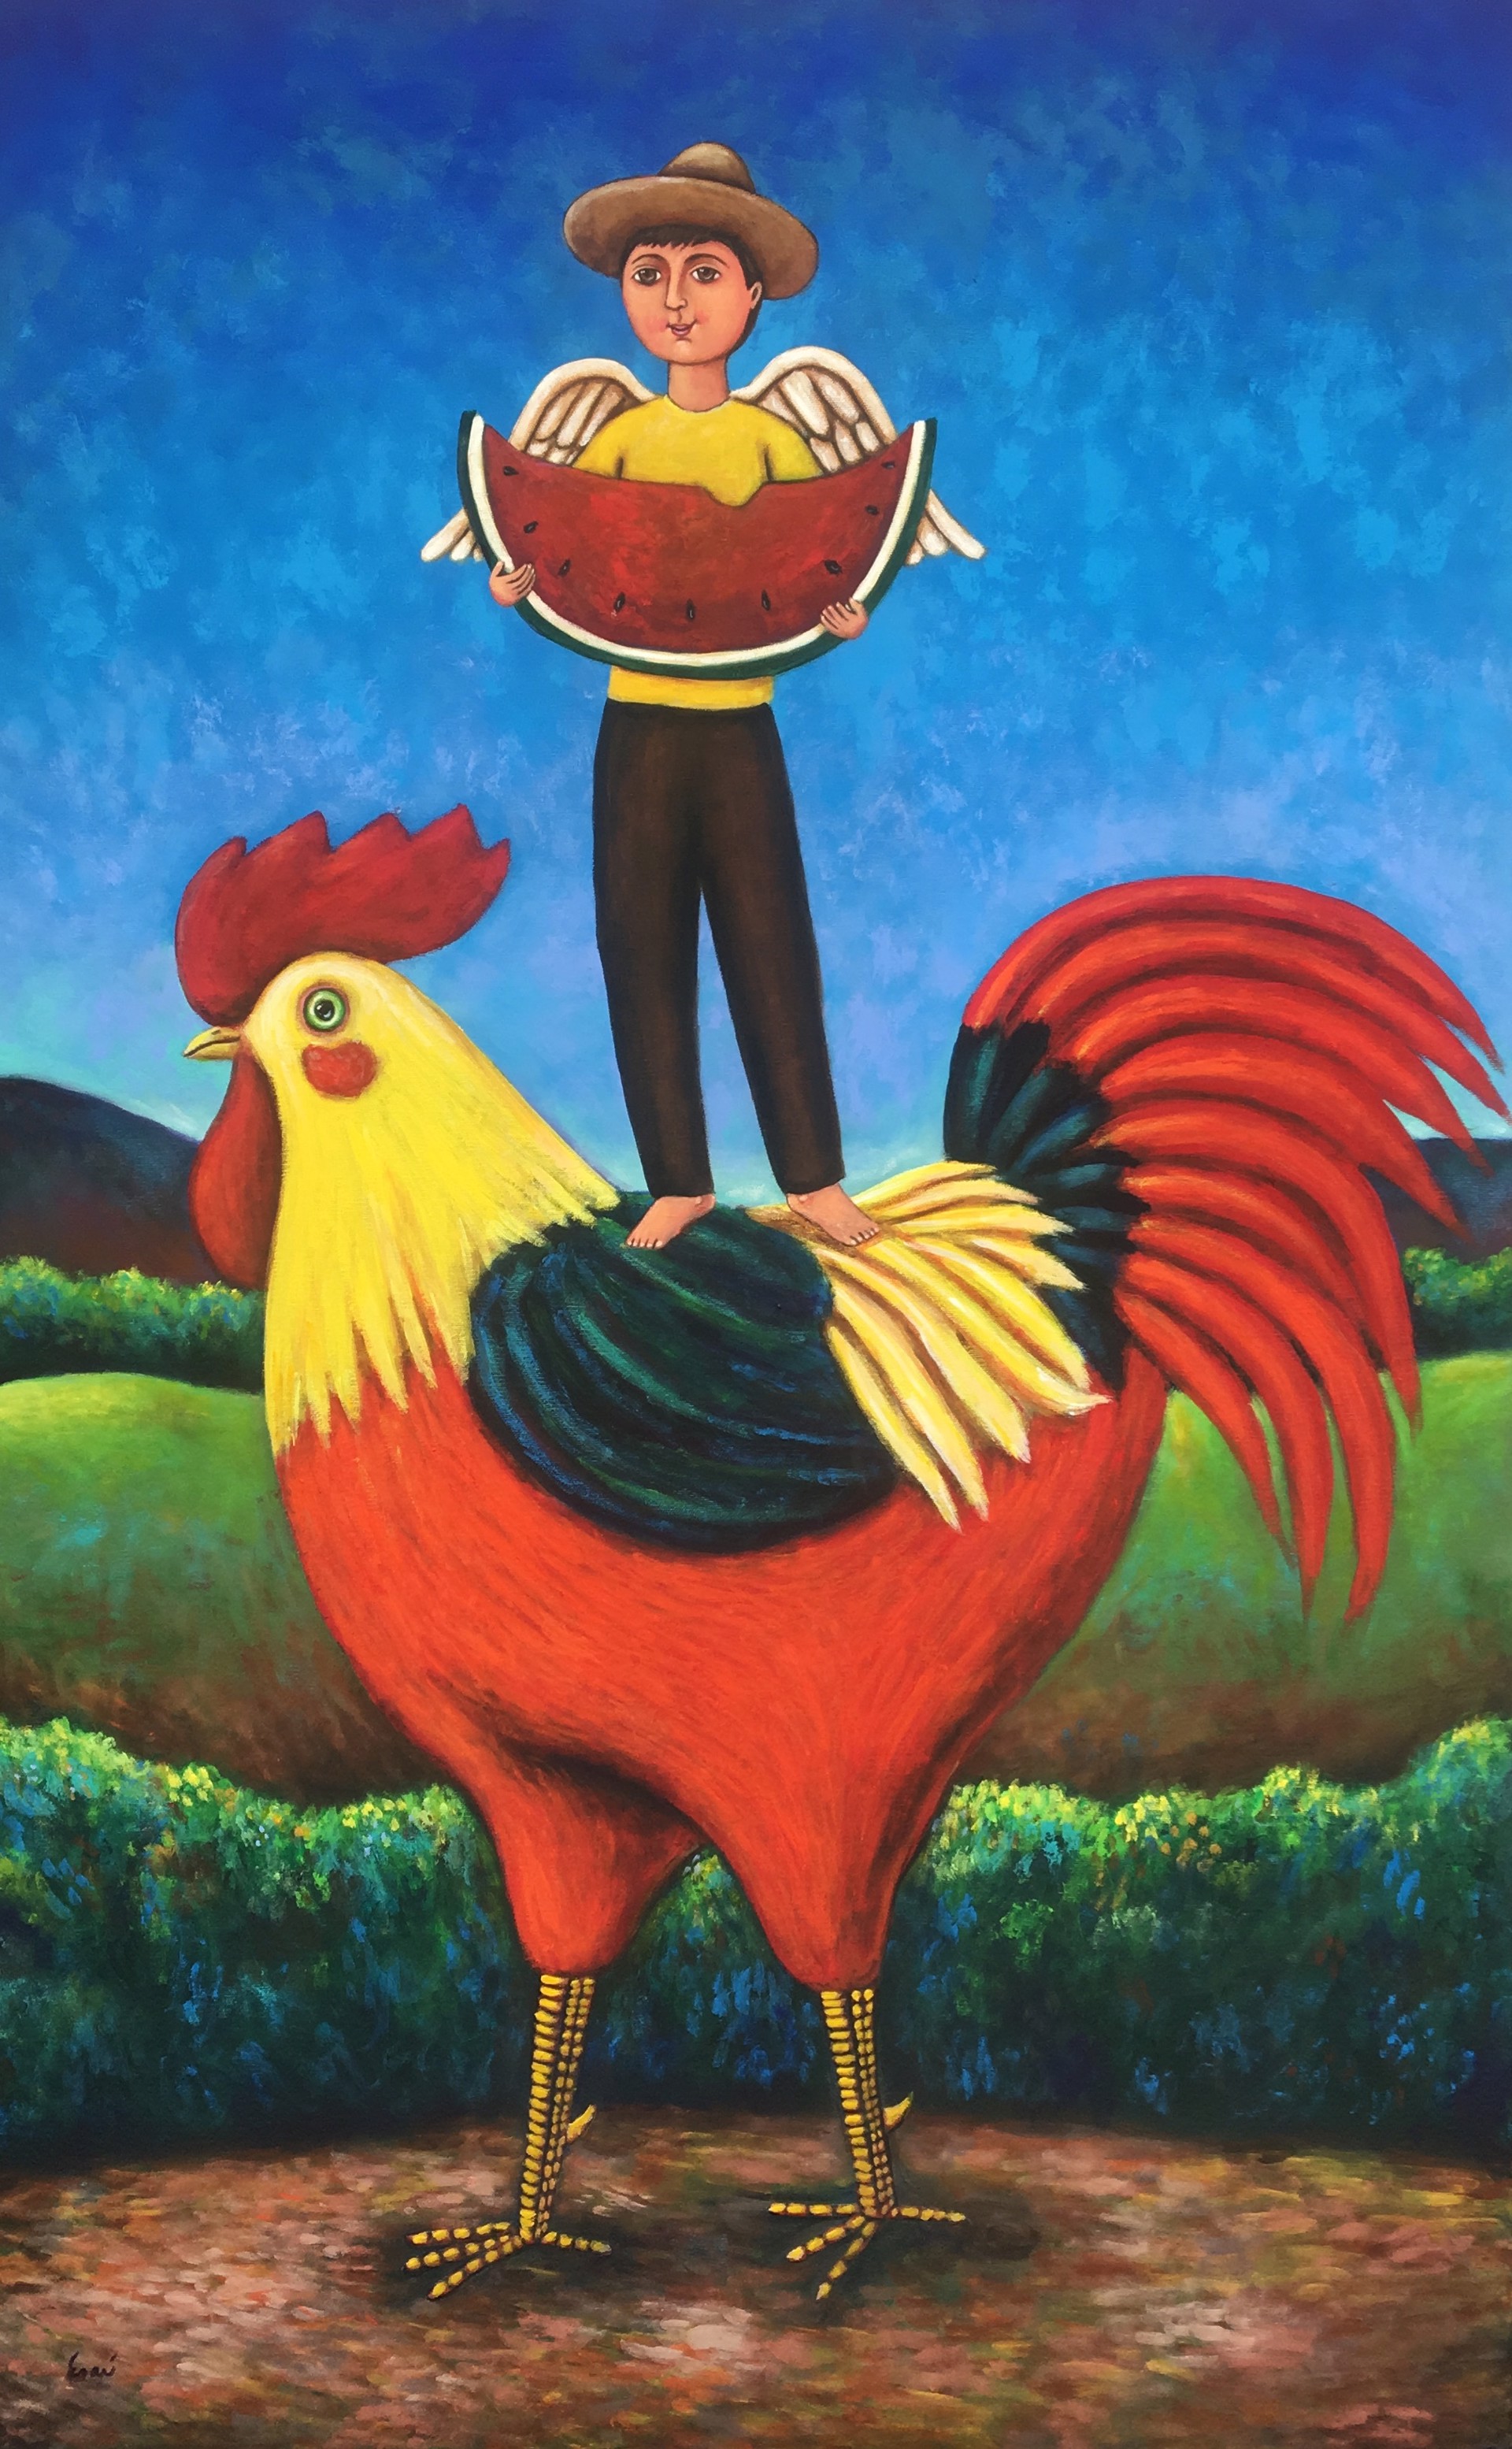 Ángel with Sandia and Rooster by Esau Andrade